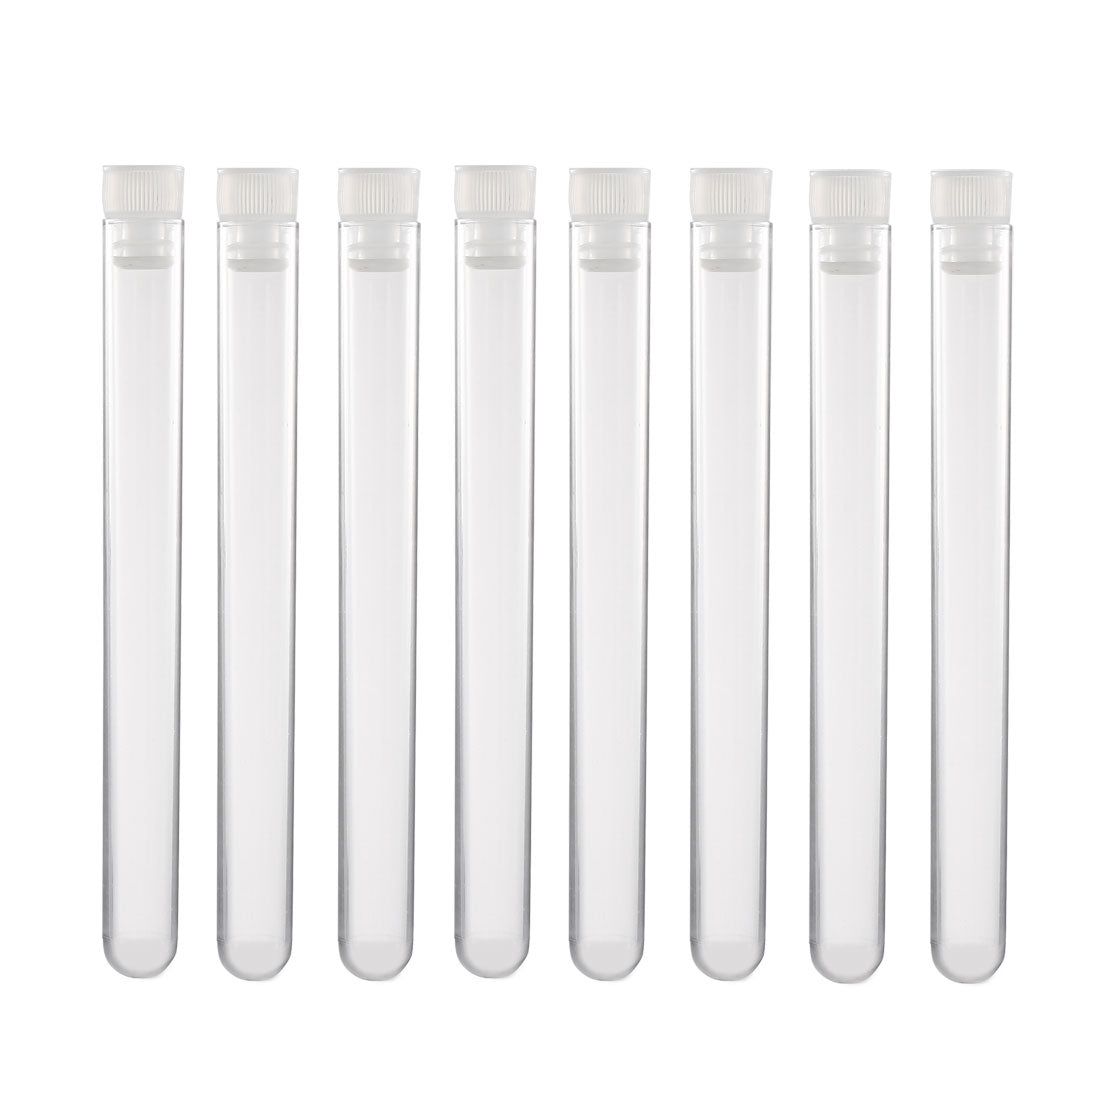 Uxcell Uxcell 30 Pcs Centrifuge Test Tube Round Bottom Polystyrene with Blue Cap